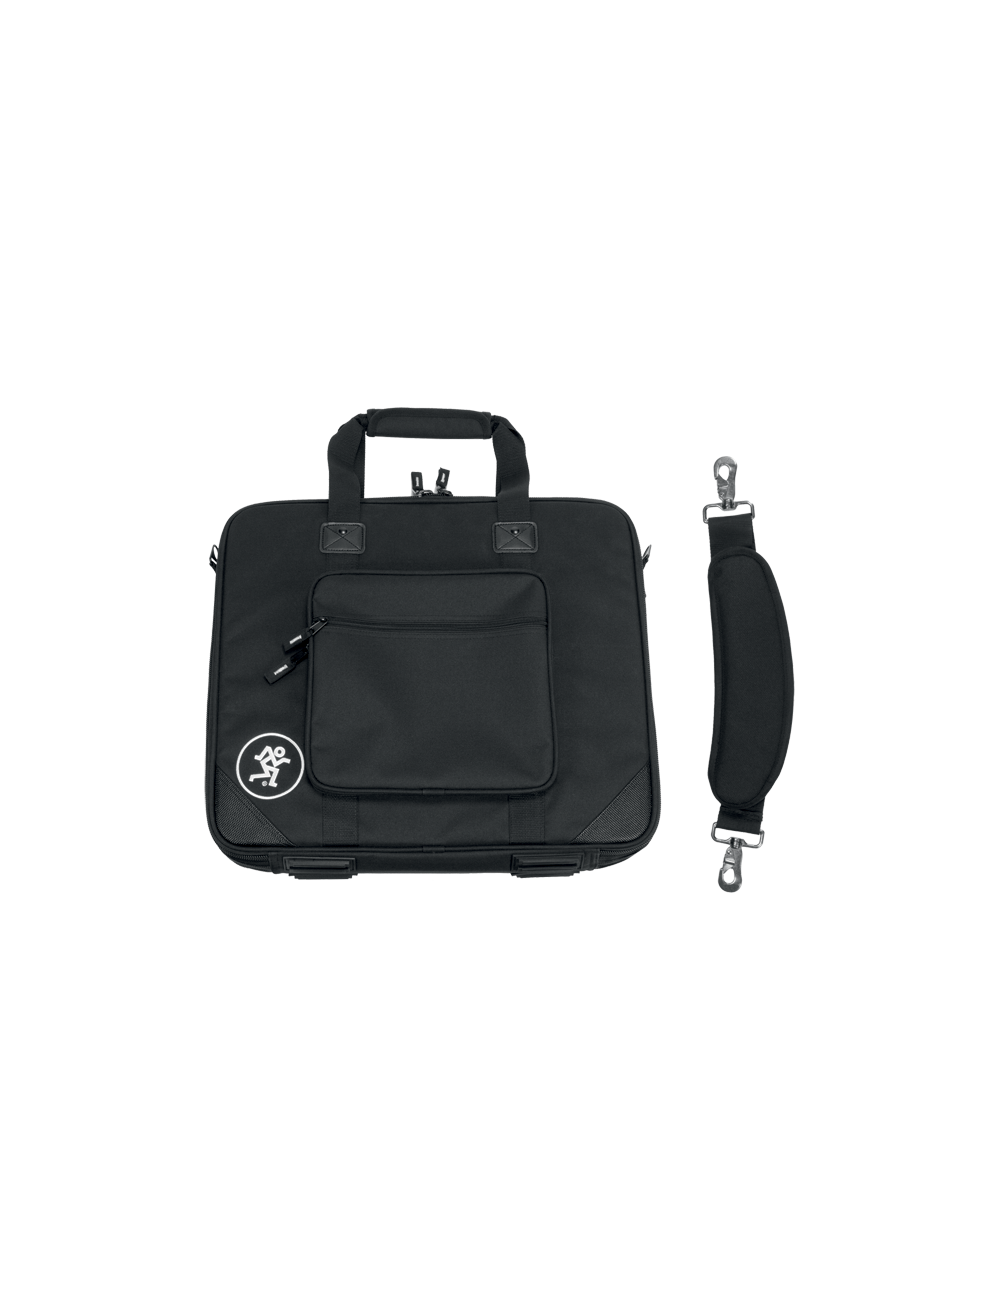 Carrying case for ProFX8